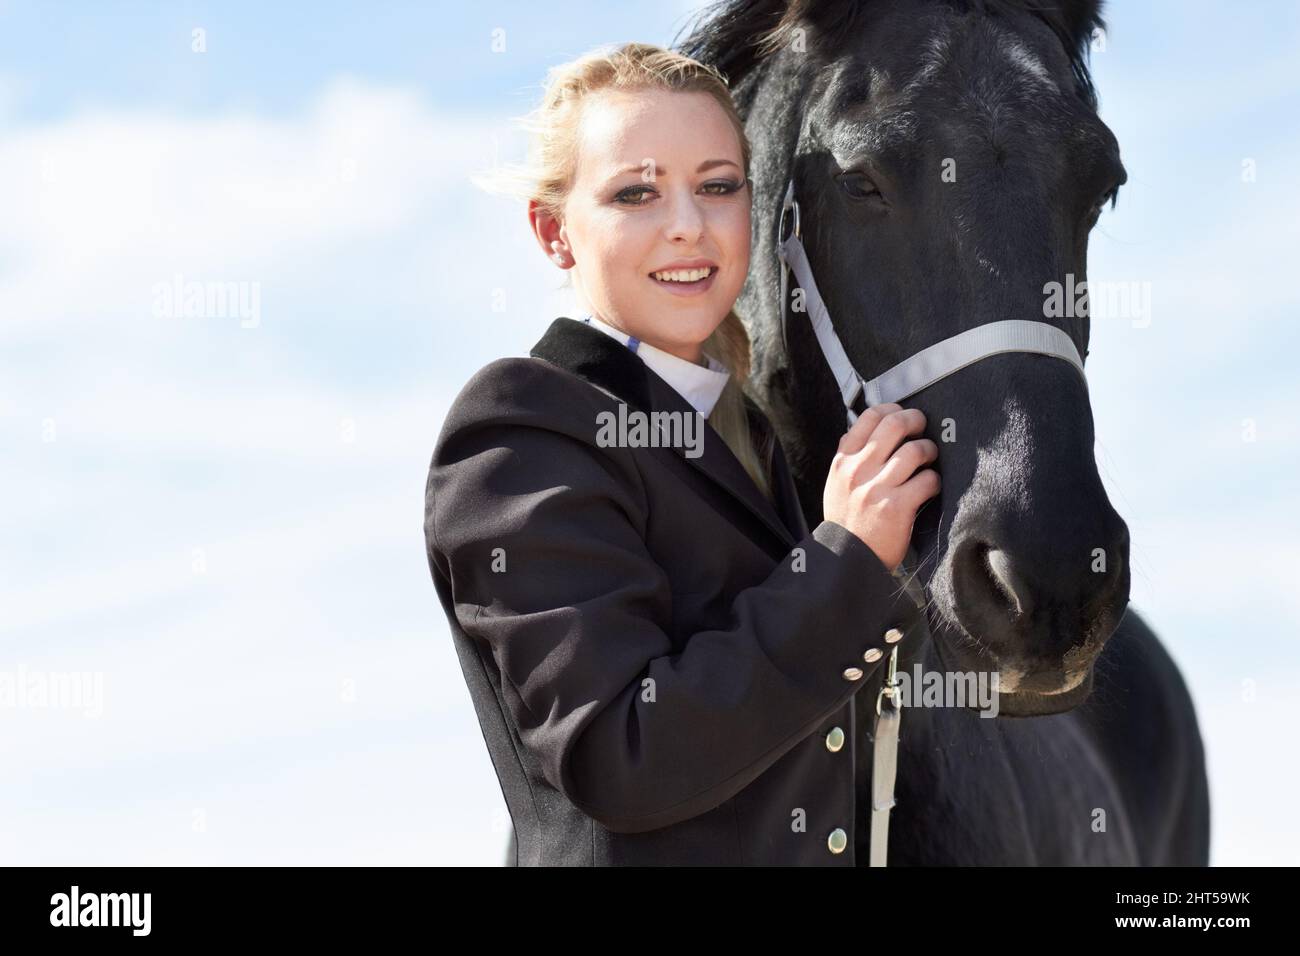 The bond between rider and horse. Low angle portrait of a young female rider hugging her horse affectionately. Stock Photo